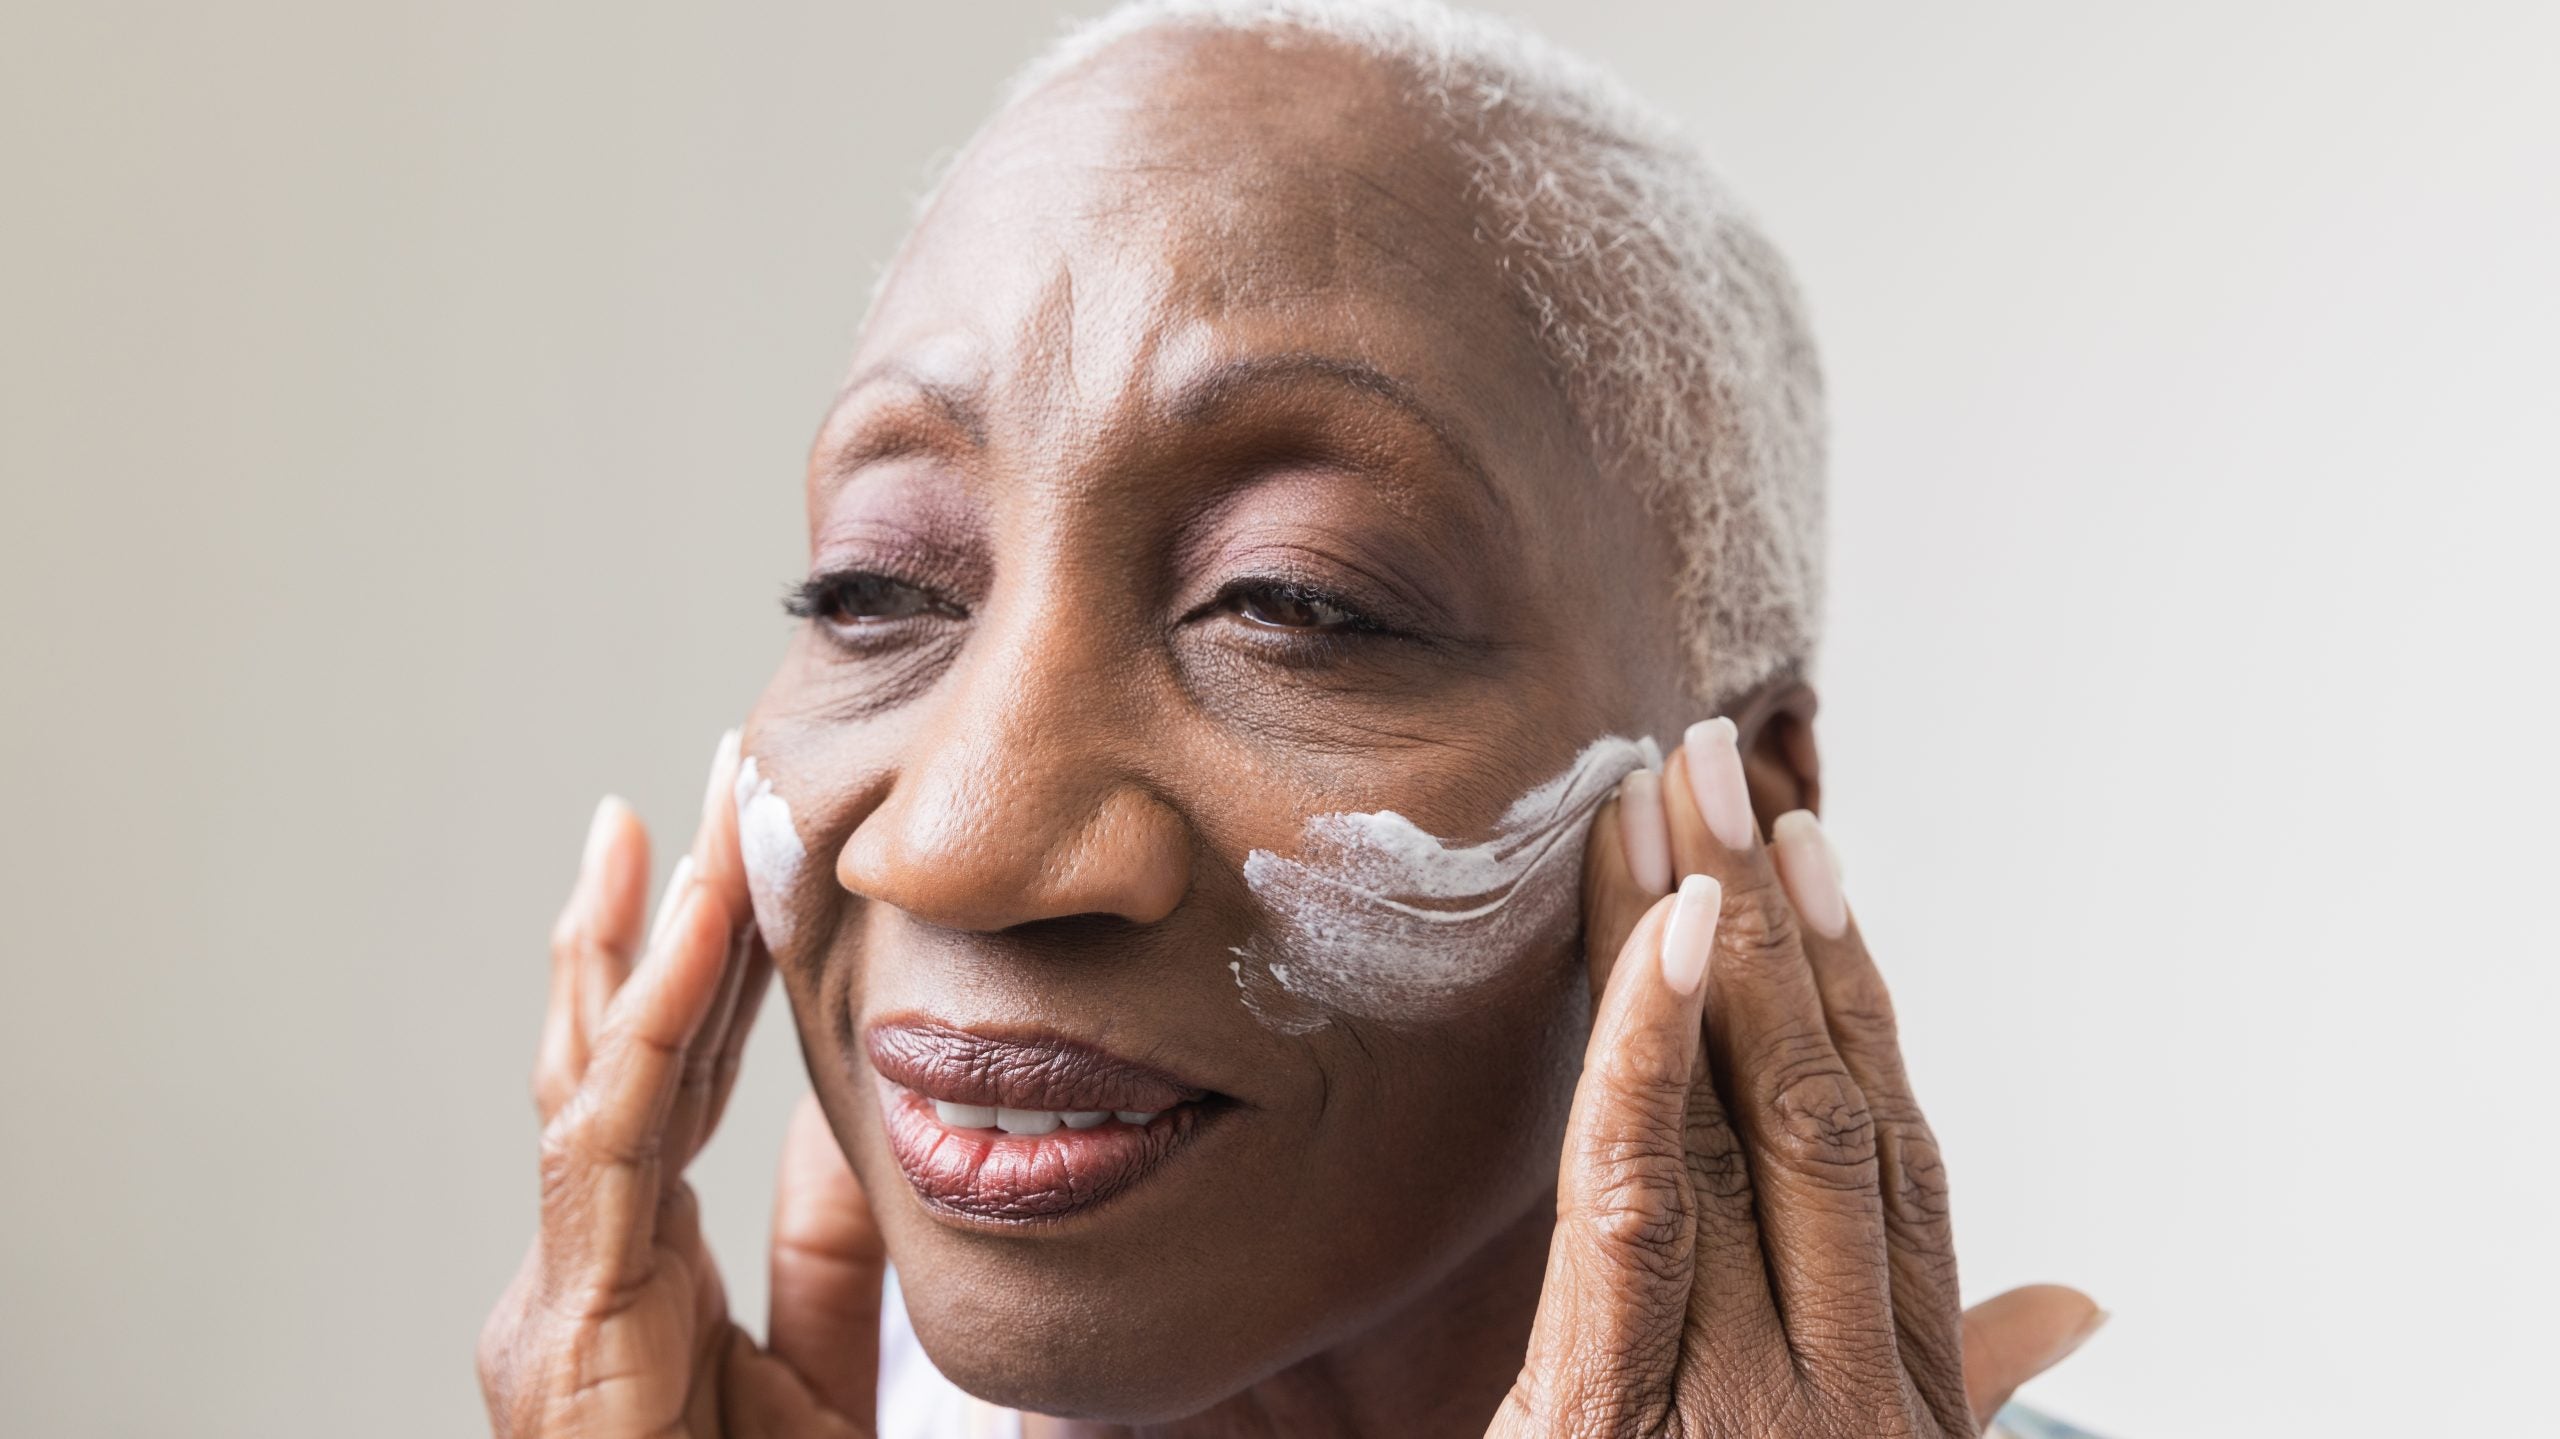 The Problem With The Term “Anti-Aging” – According to Industry Experts